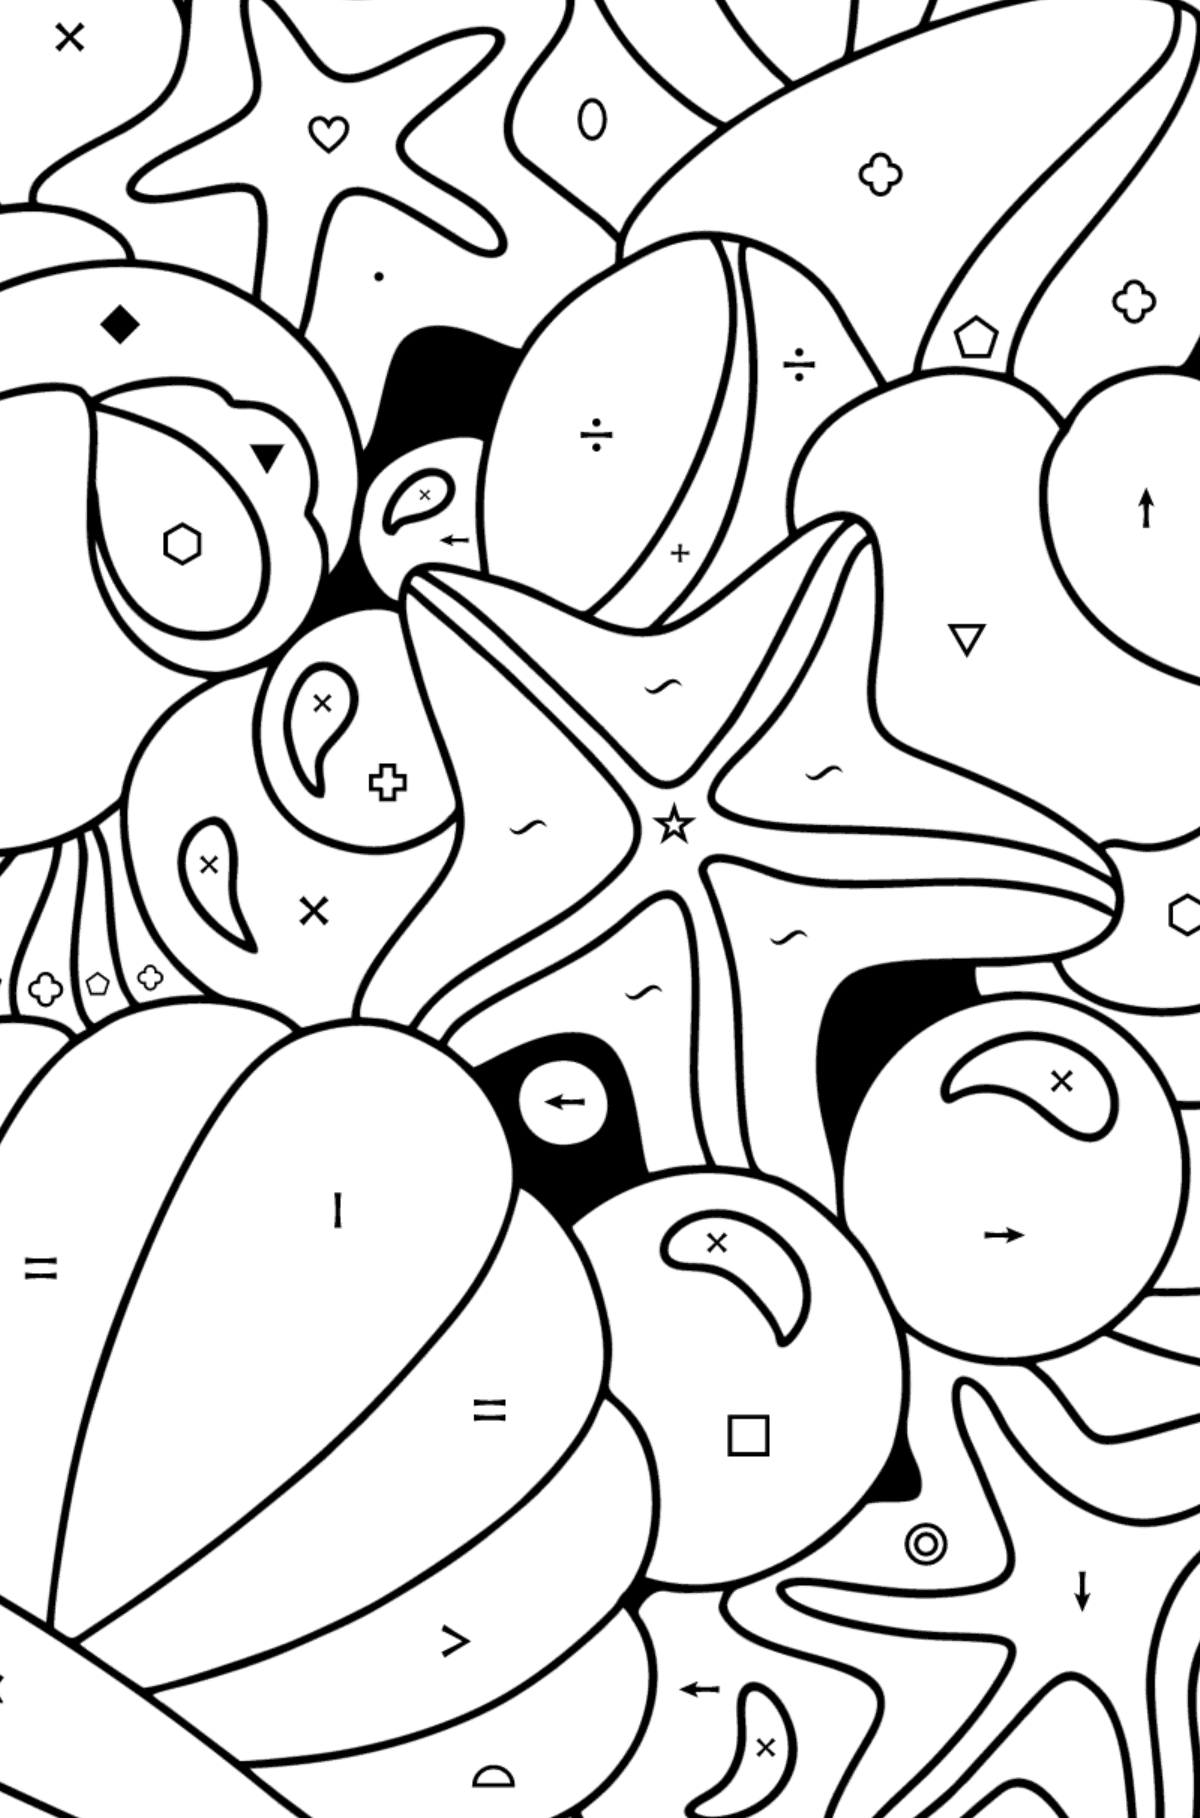 Doodle coloring page for Kids - Shells - Coloring by Symbols and Geometric Shapes for Kids